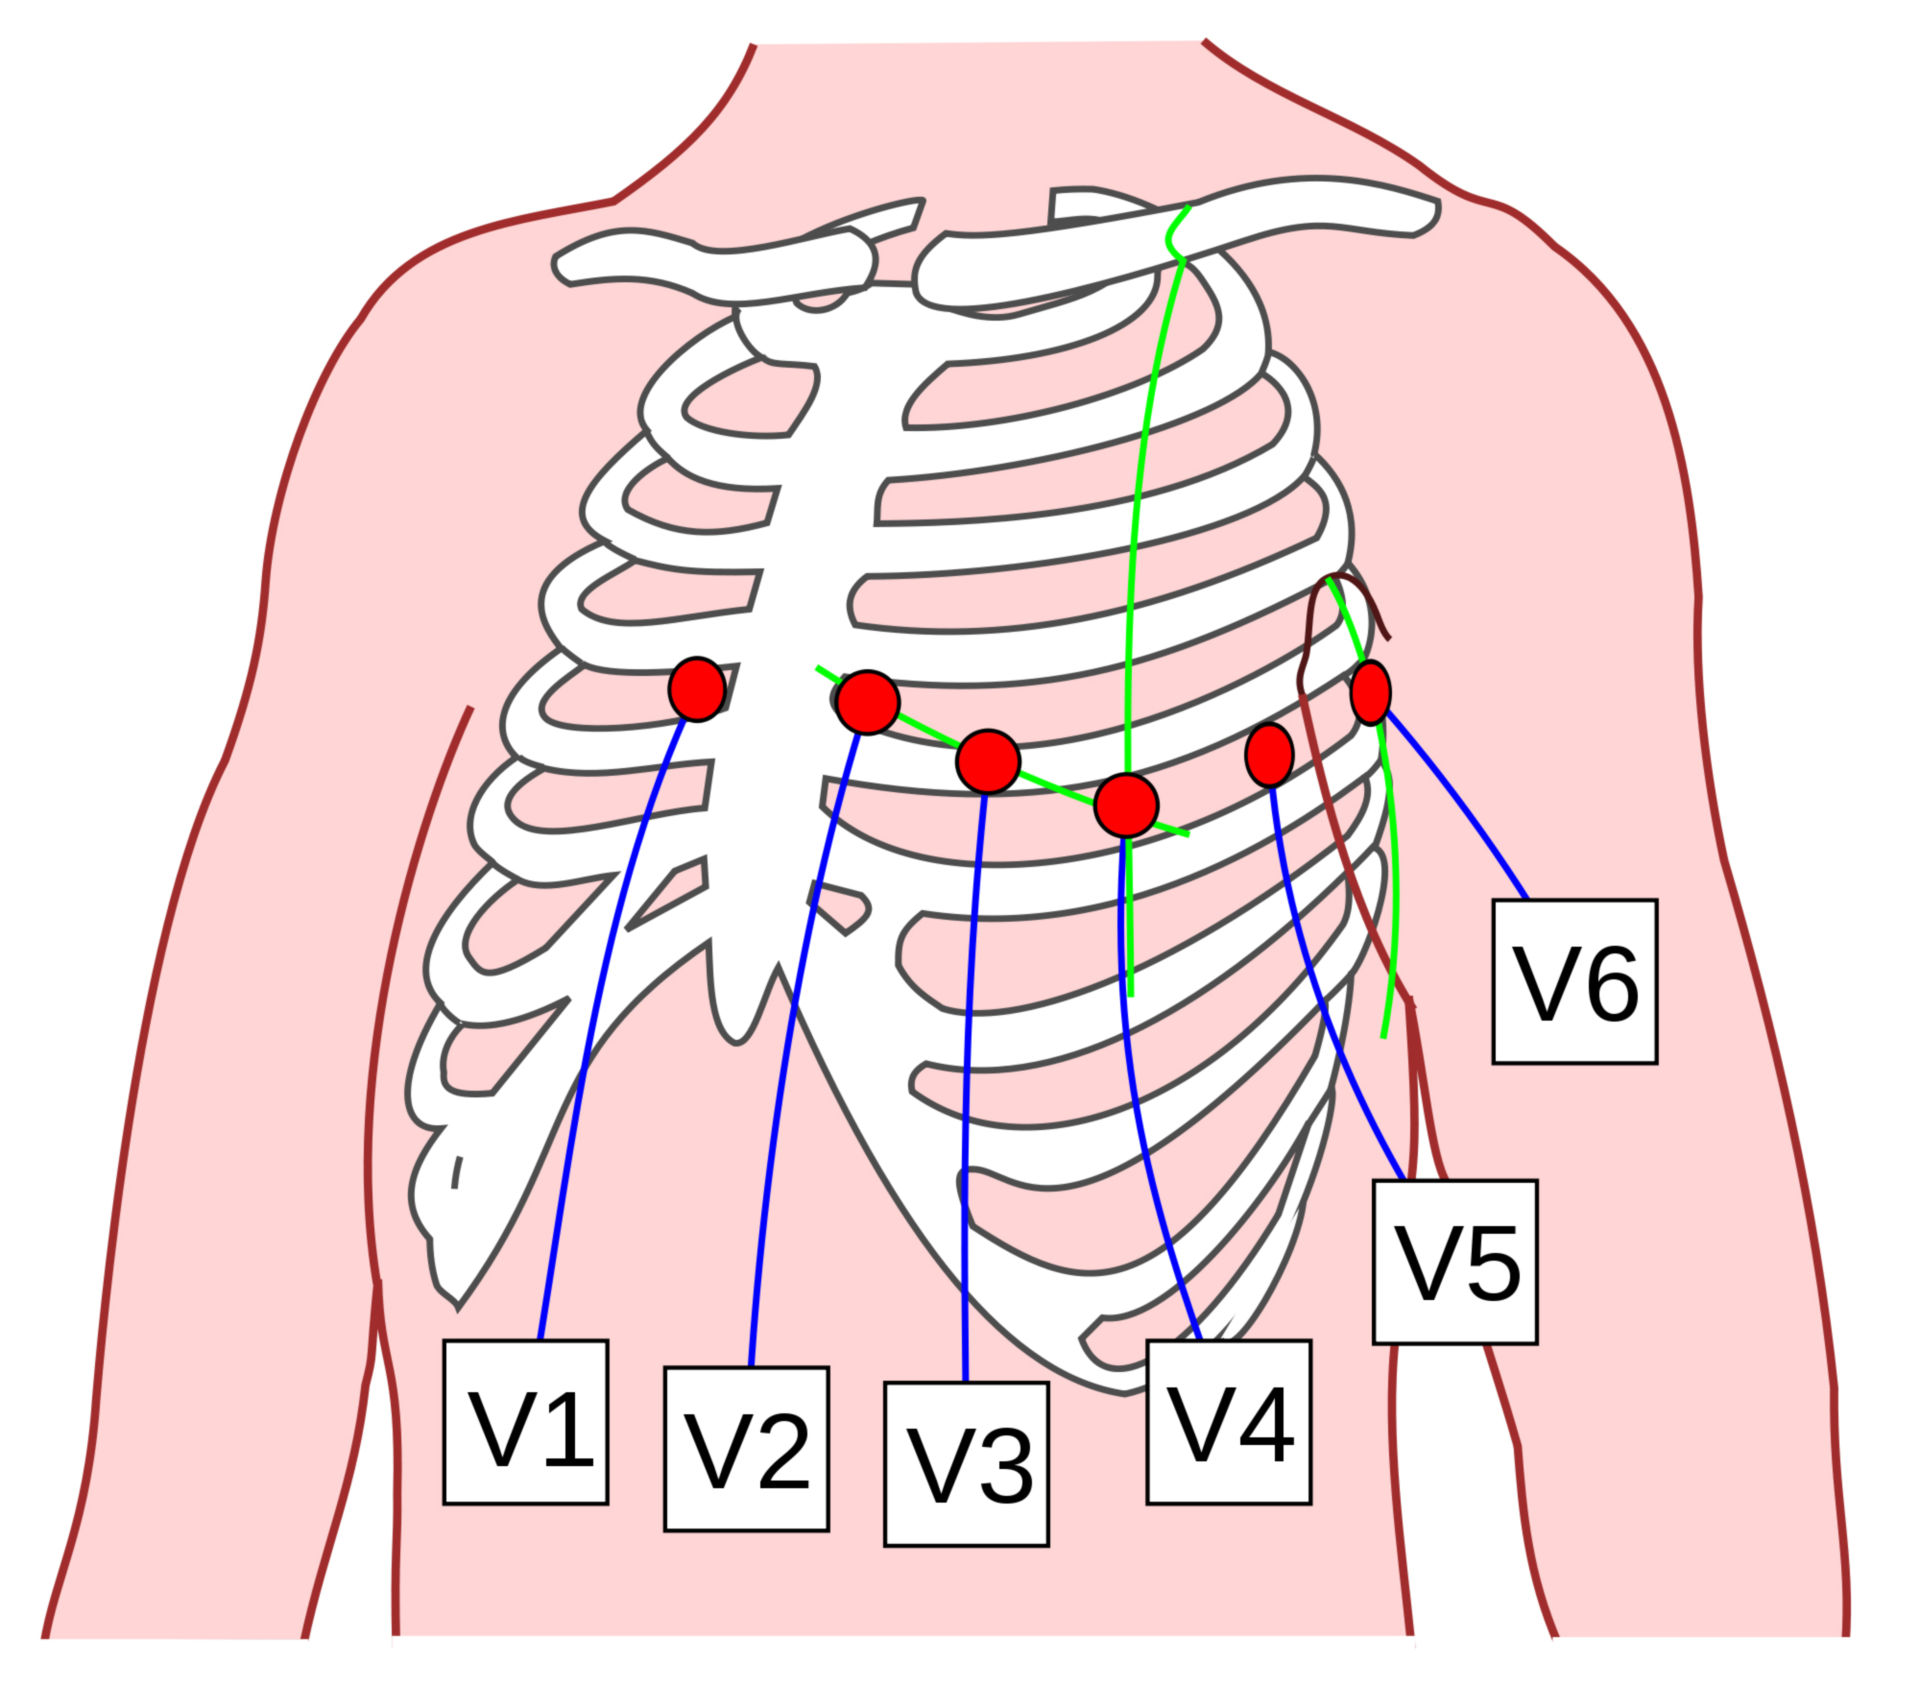 Precordial ECG leads after Wilson